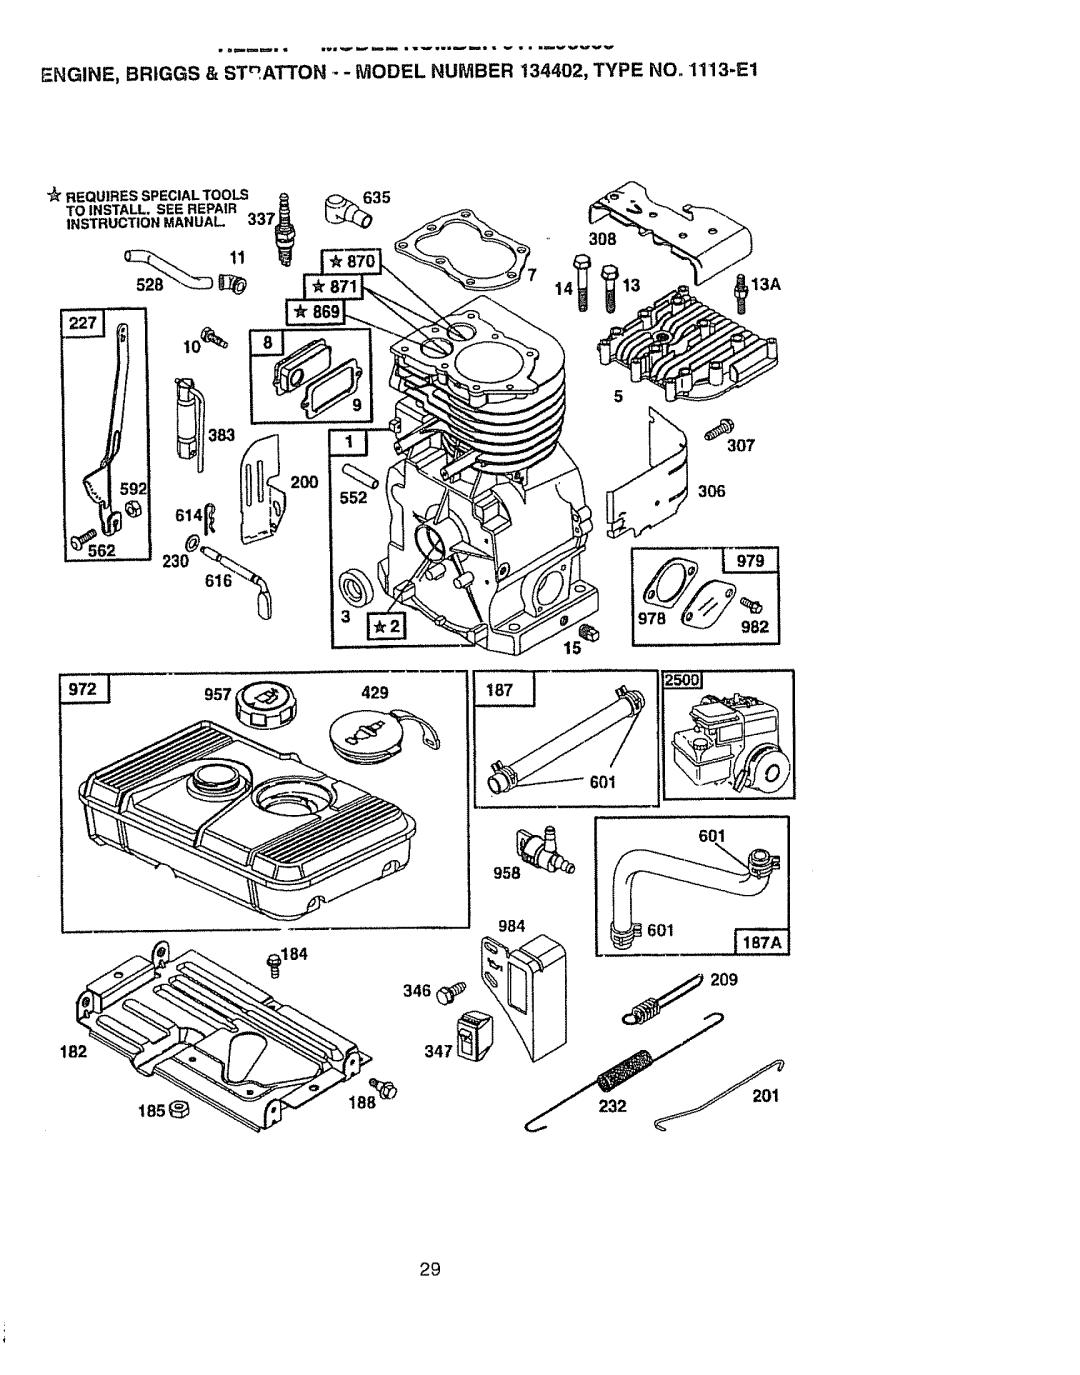 Craftsman 917.2933 owner manual 562, 184, REQUIRES SPECIAL TOOLS e, To Install, See Repair, w= I v i = w n w v ww 